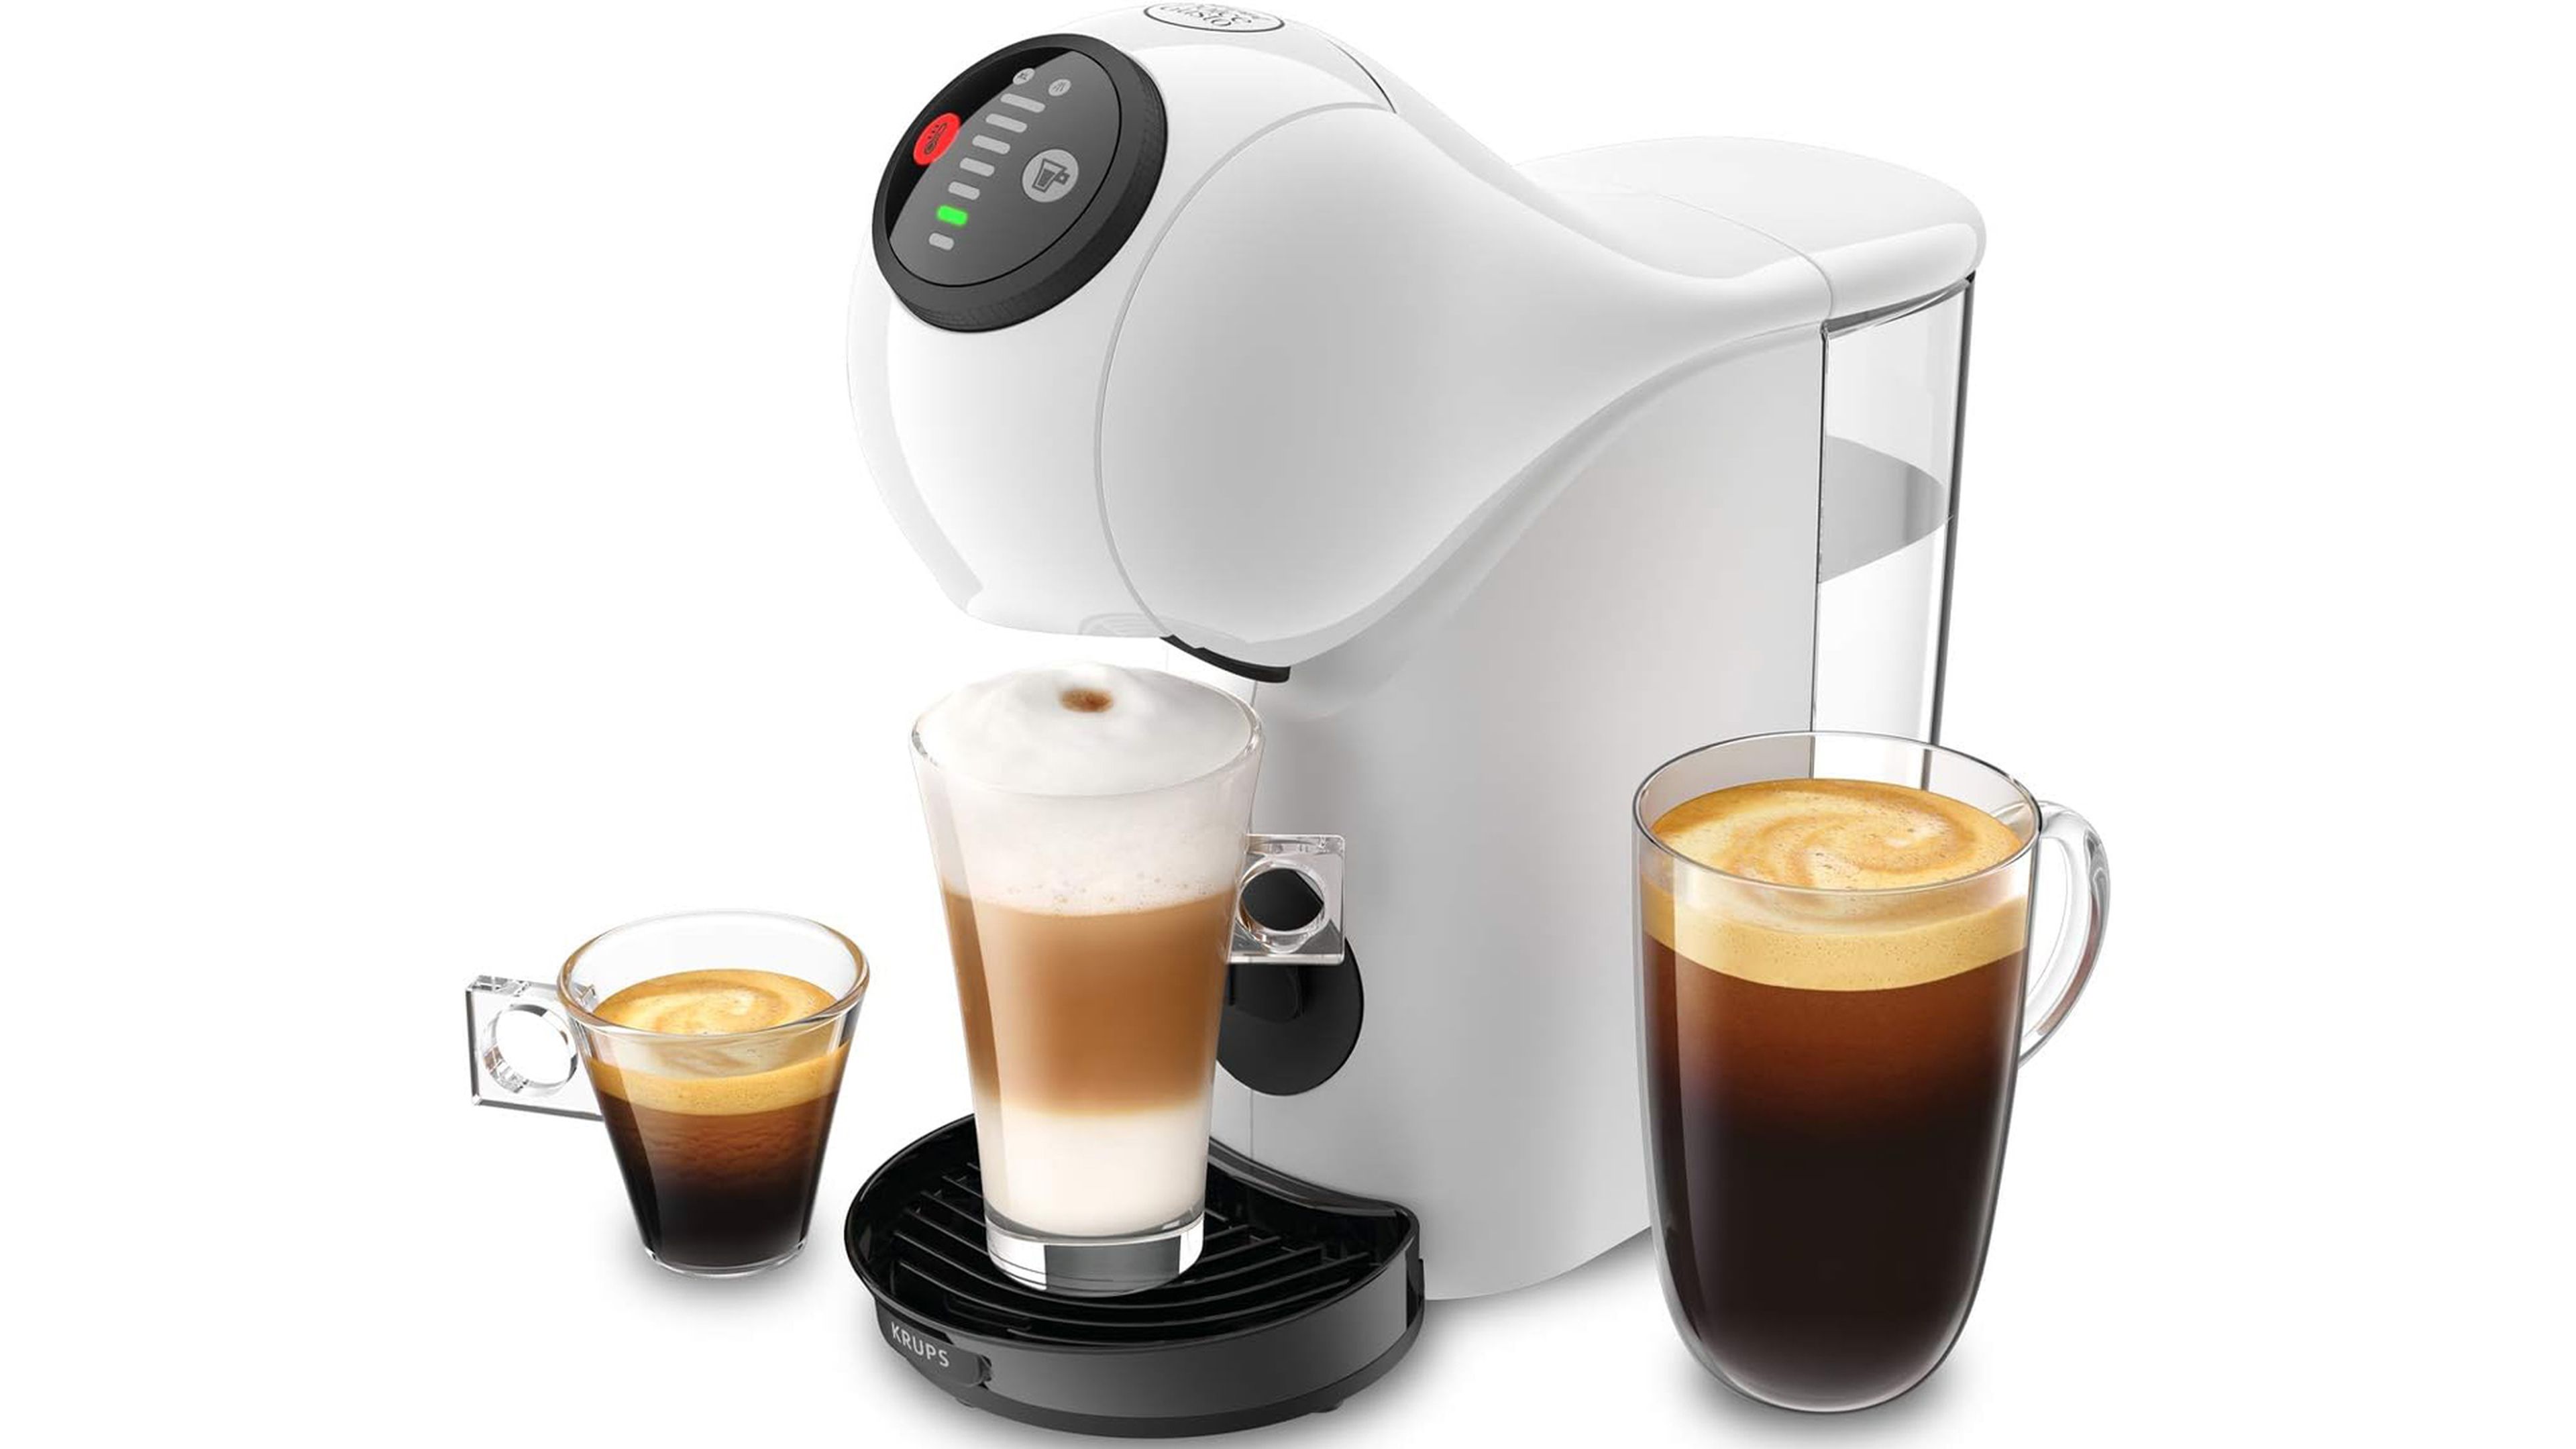 Cafetera Dolce Gusto Piccolo XS EDG110WB